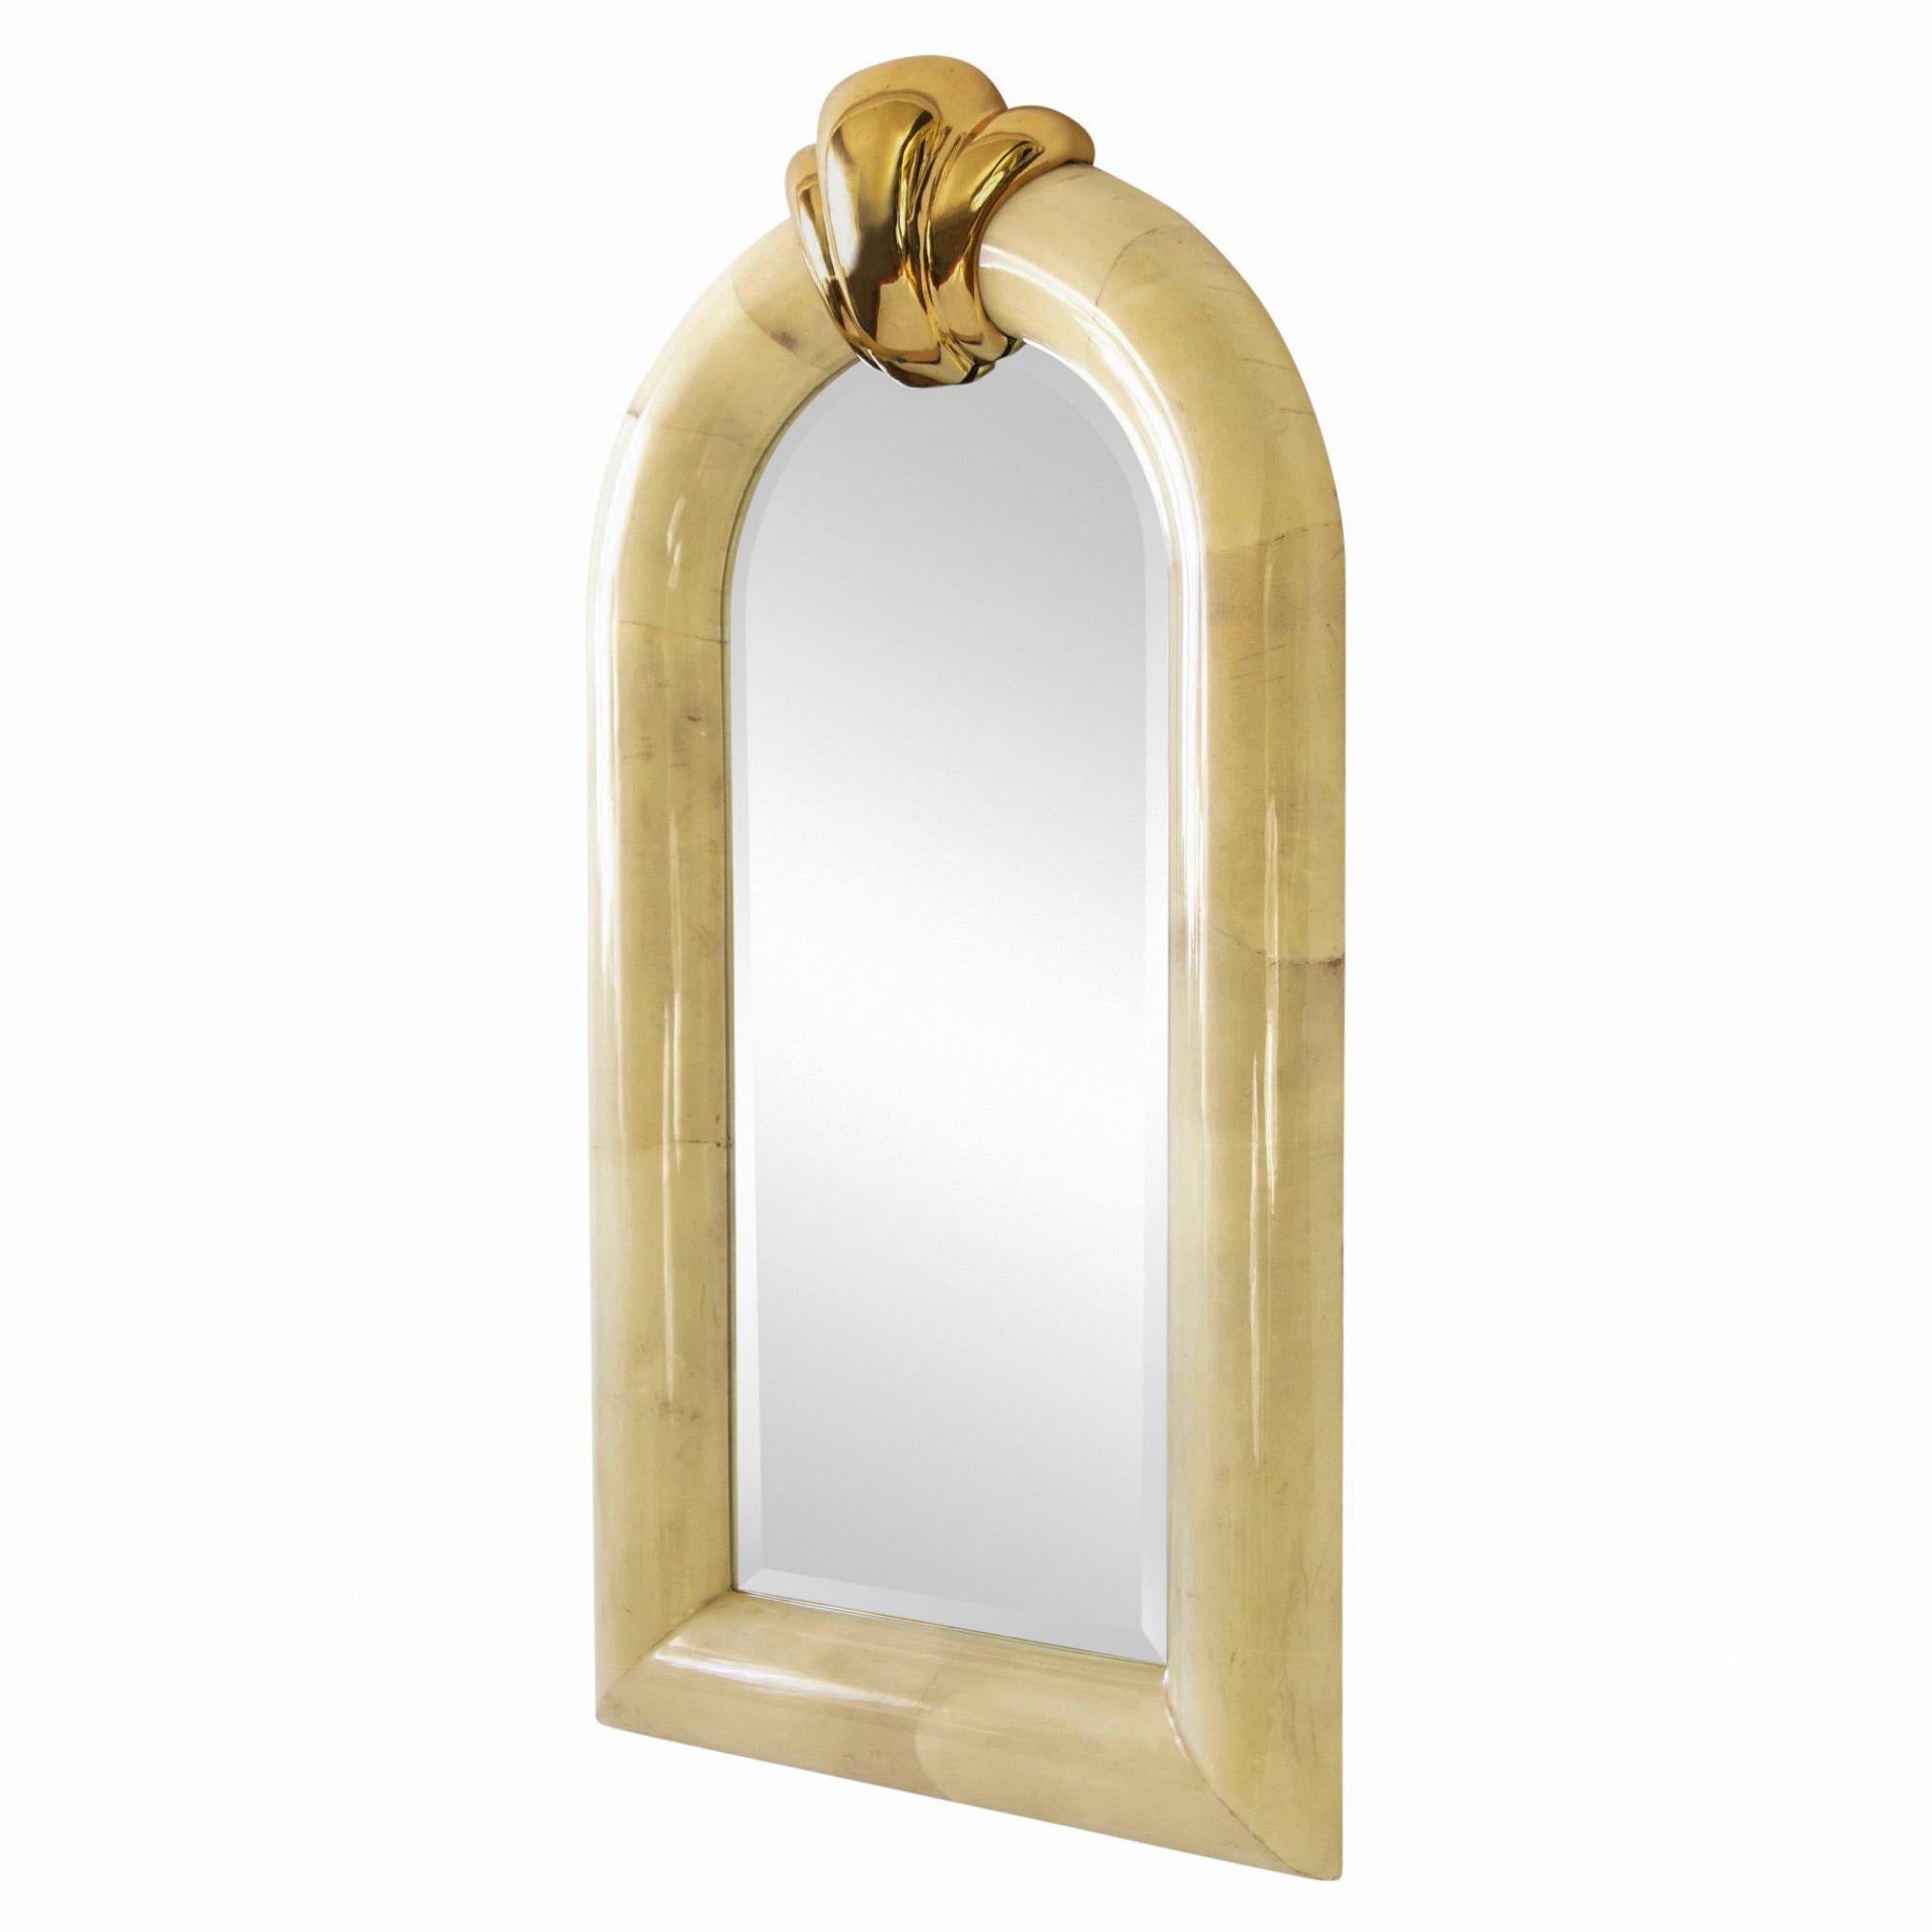 1980s Karl Springer inspired goatskin beveled mirror with a large solid brass keystone crest. The frame is made of high-gloss lacquered cream-color untanned goat skin or parchment stretched over a 5